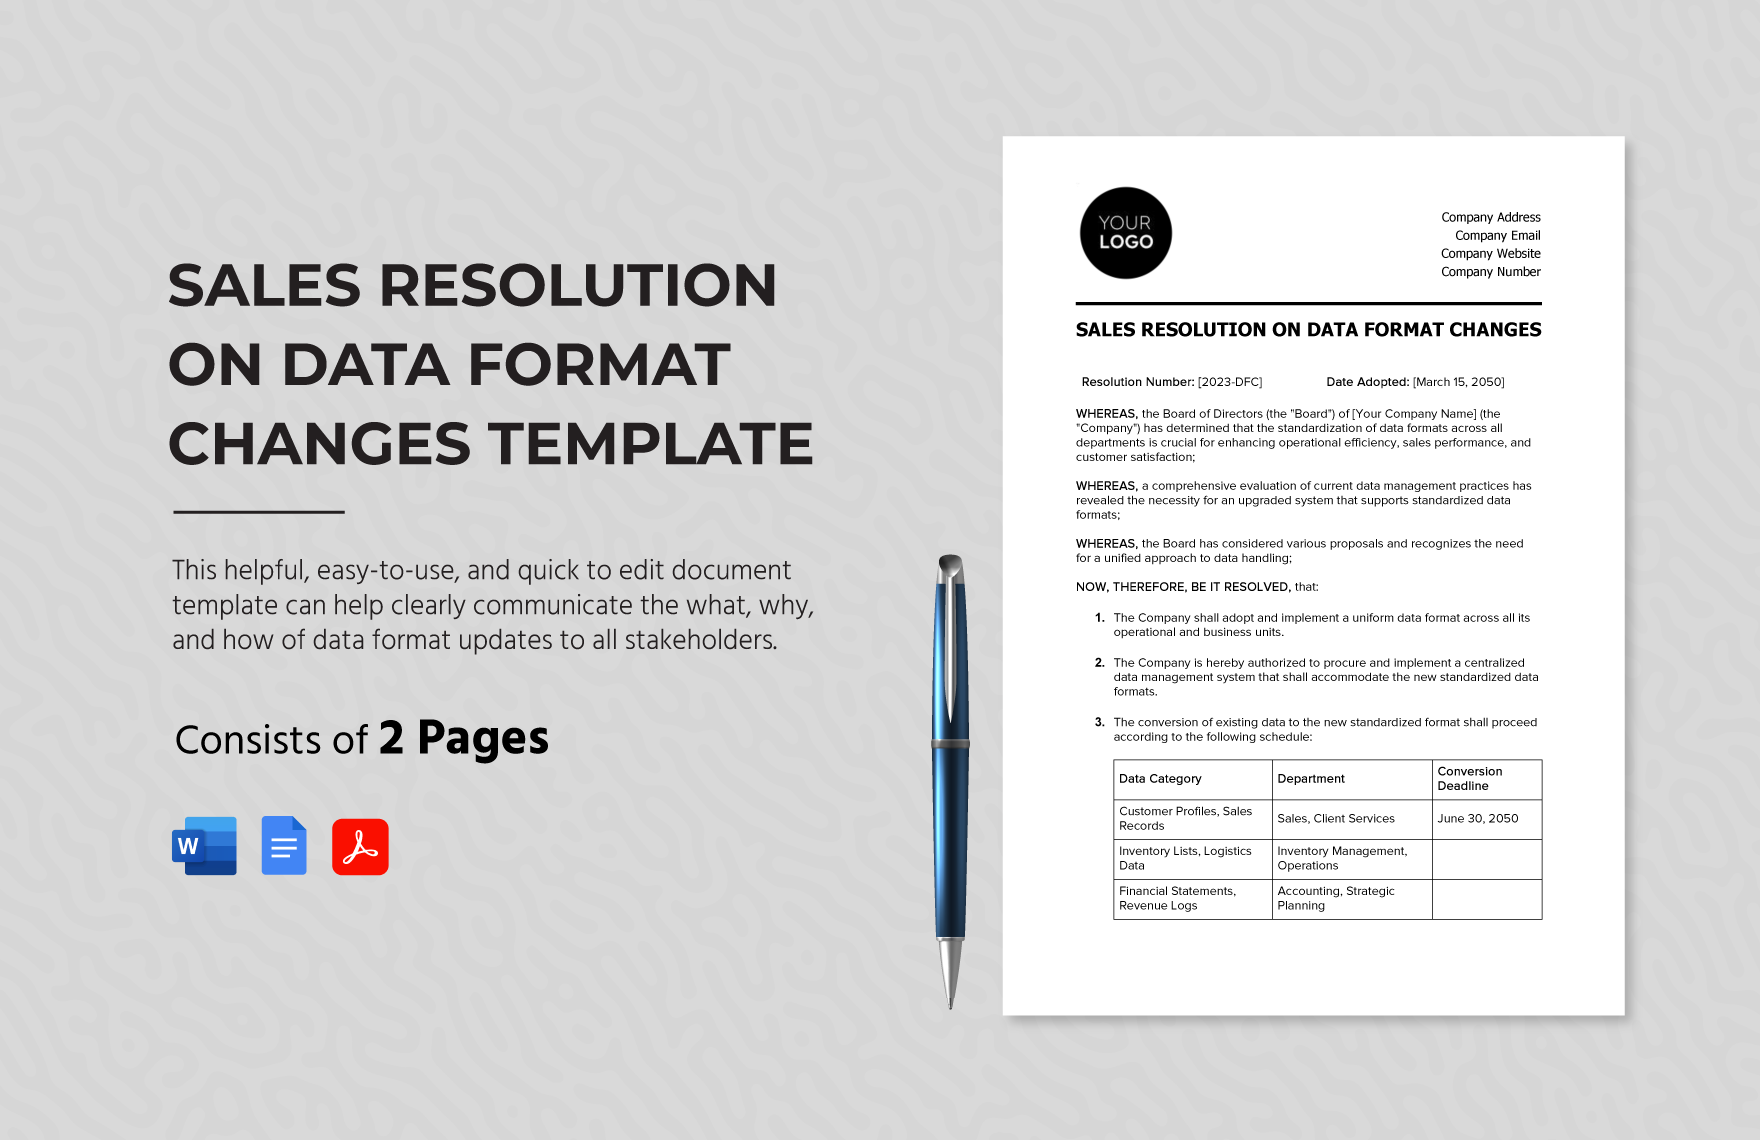 Sales Resolution on Data Format Changes Template